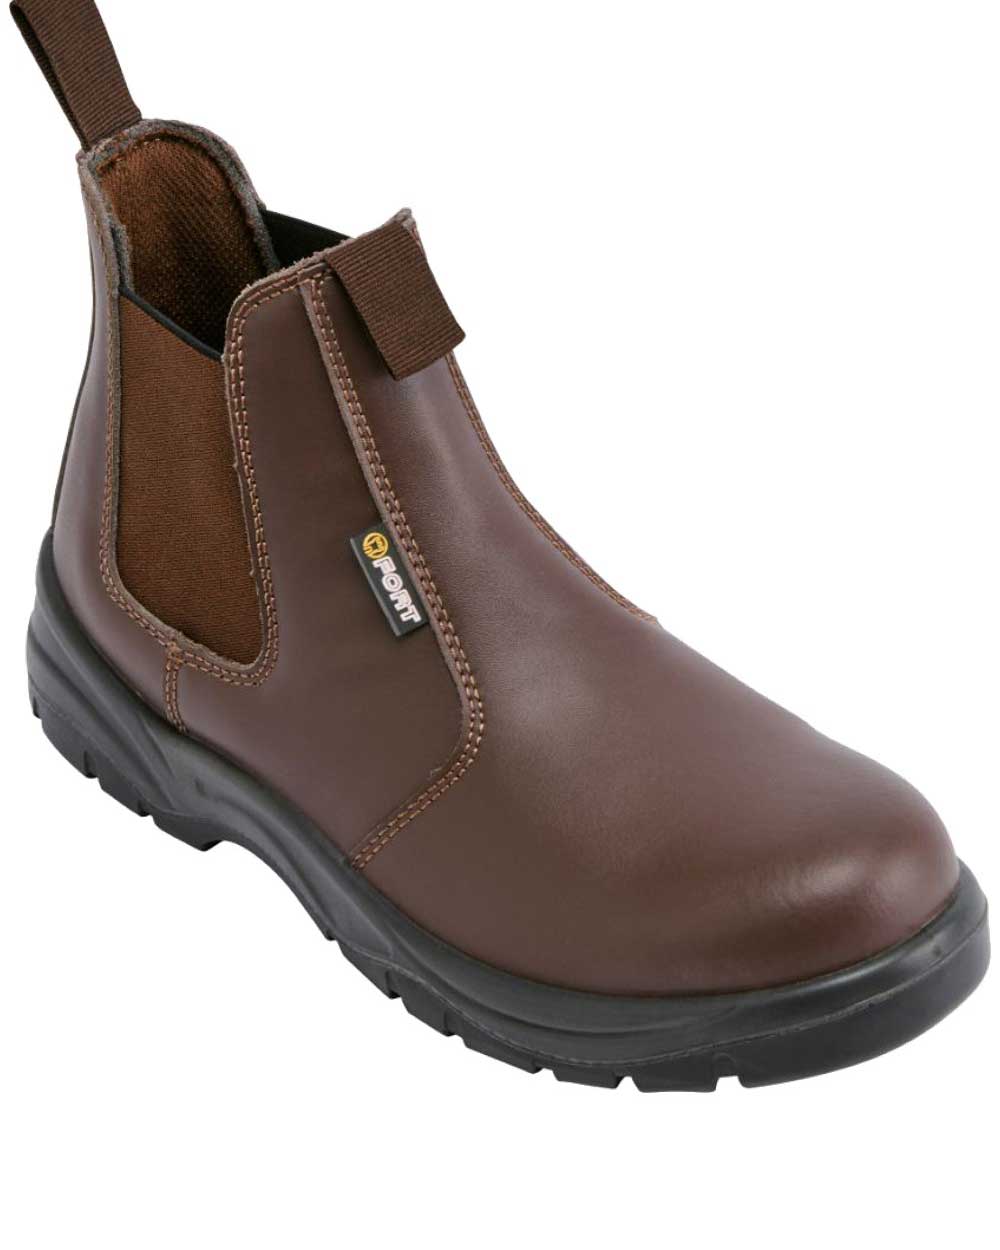 Leather Fort Nelson Safety Dealer Boots Steel toe 